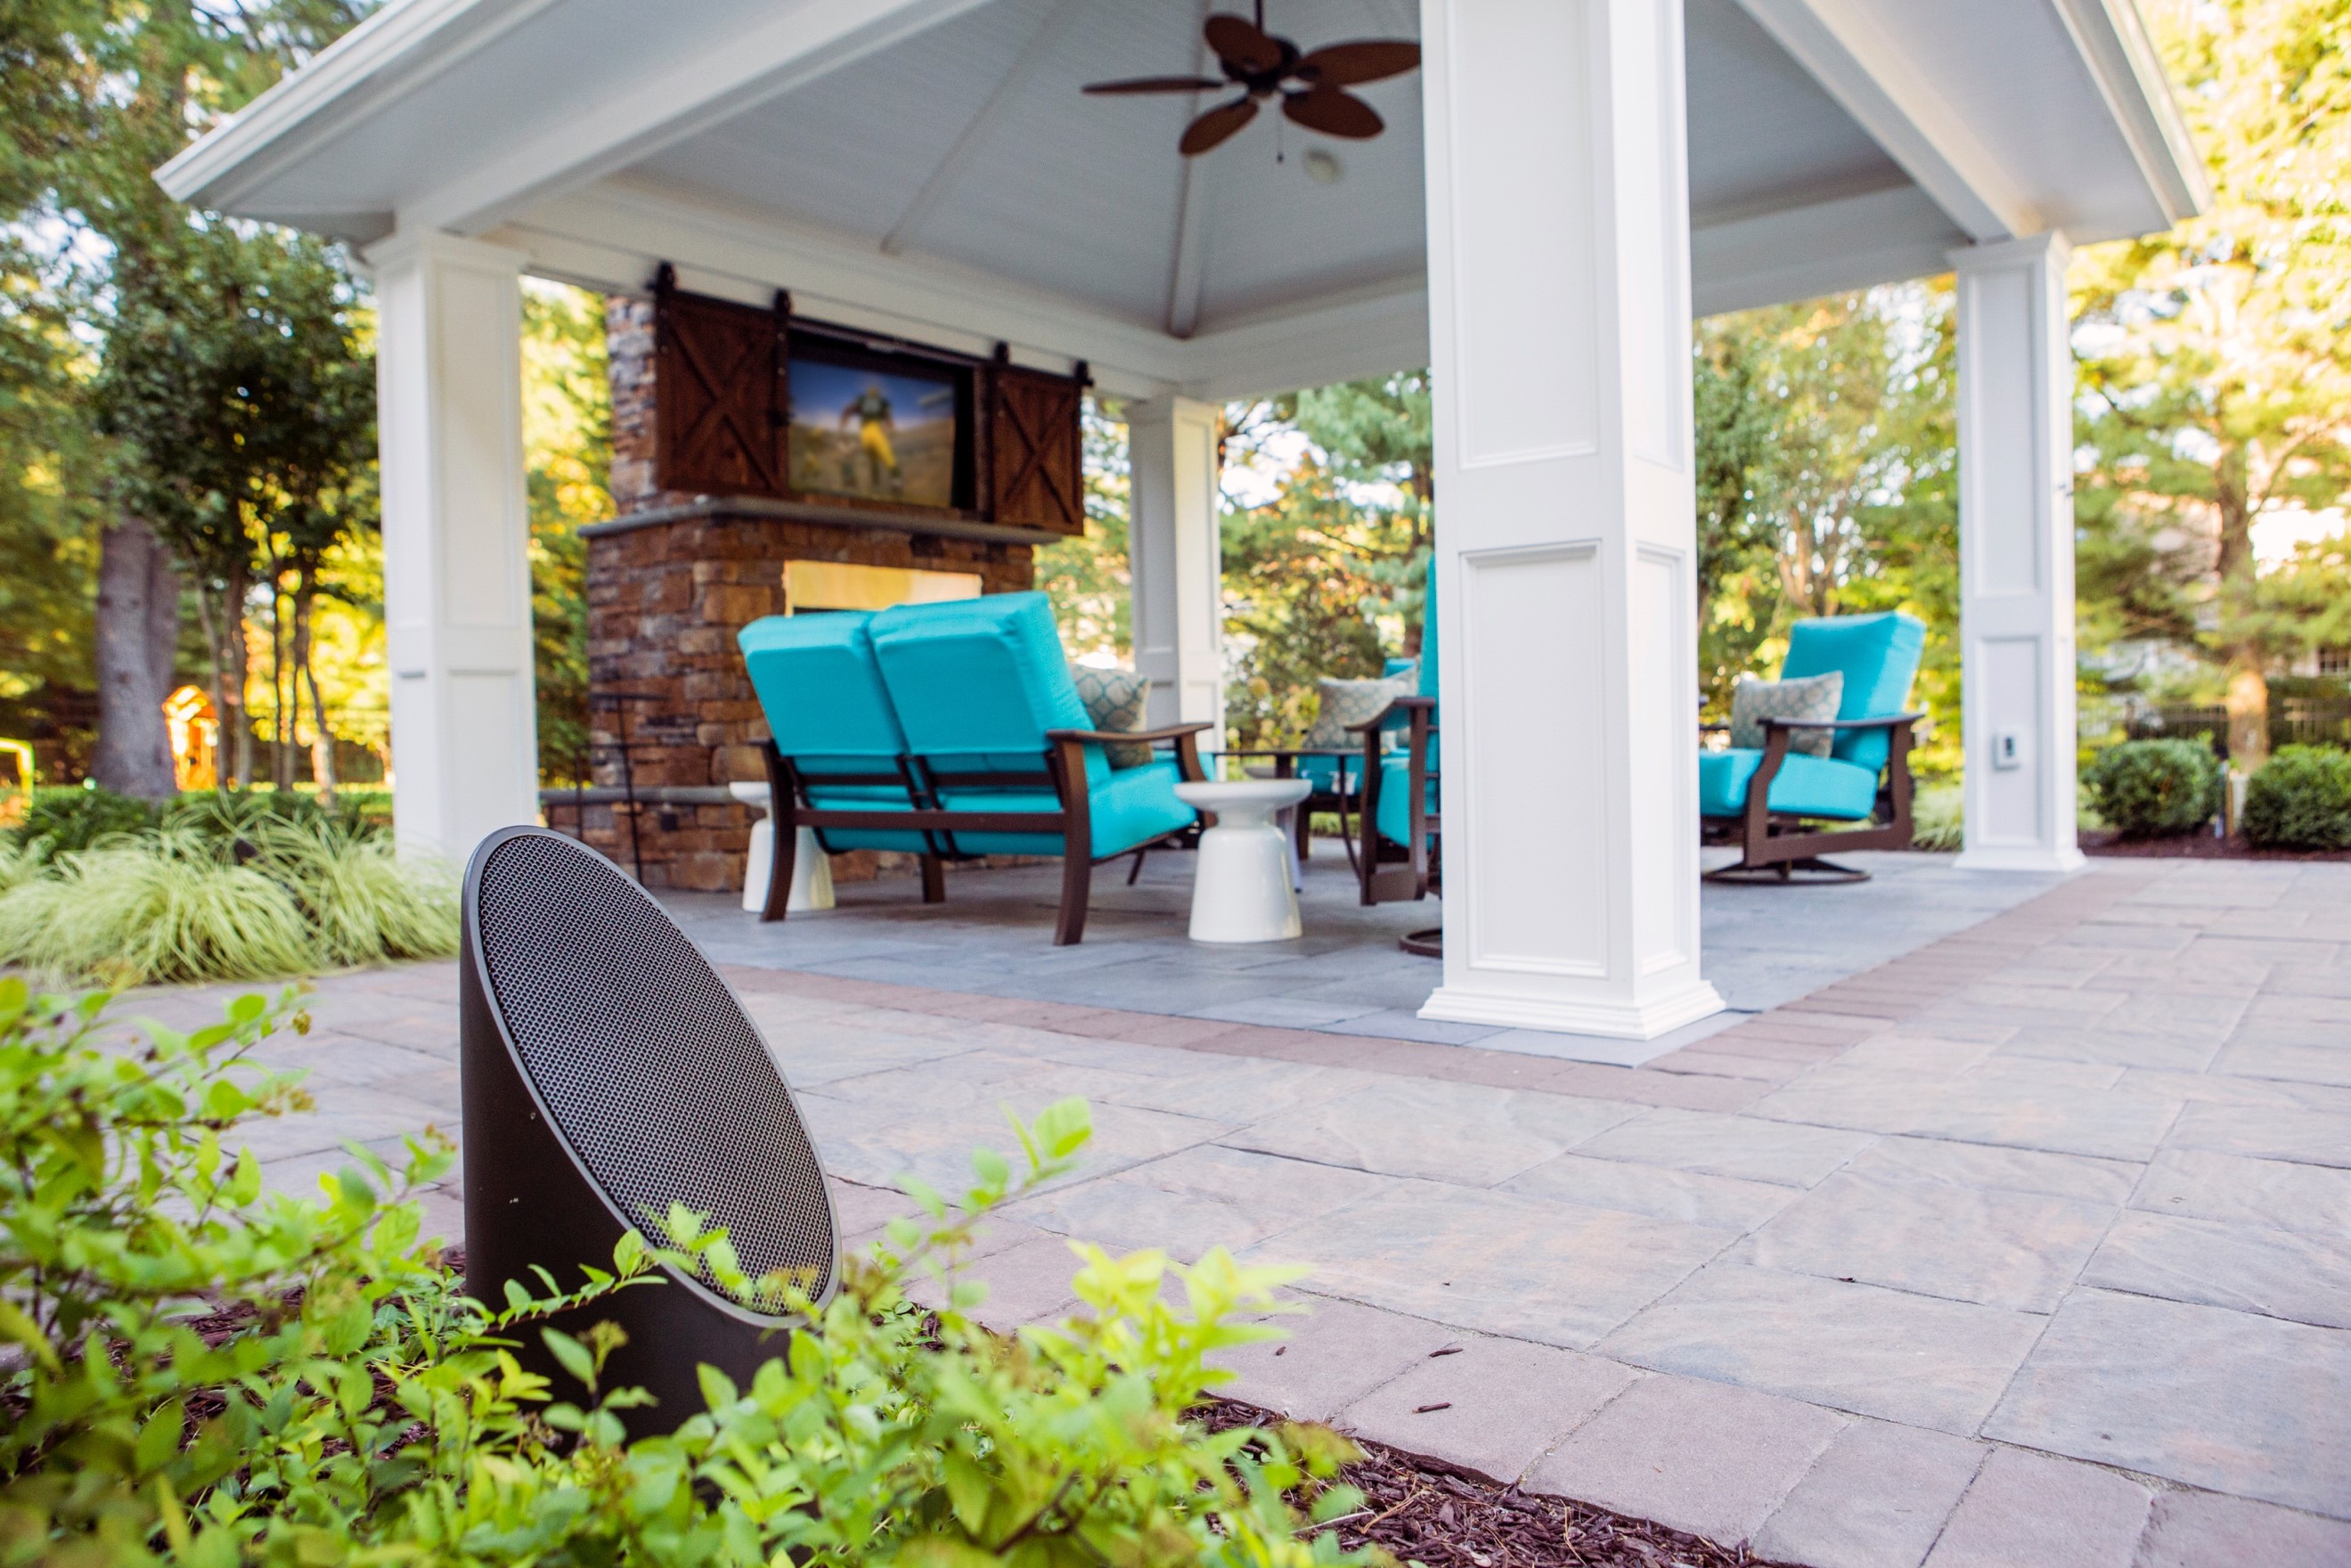 Enjoy Your Time at Home With Outdoor Sound System from Coastal Source